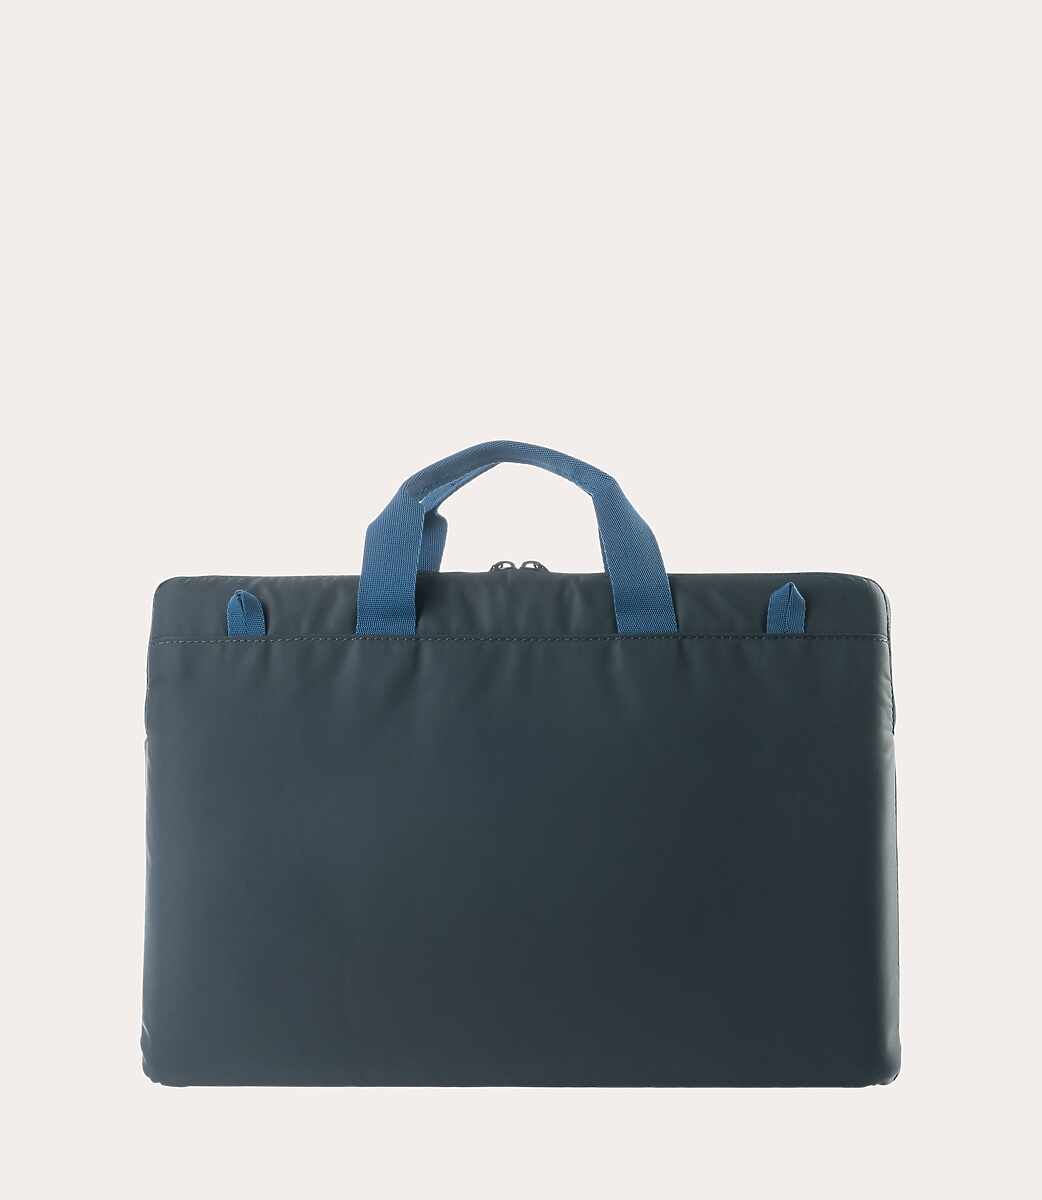 Tucano Slim Bag for Notebook 13.3" and 14"